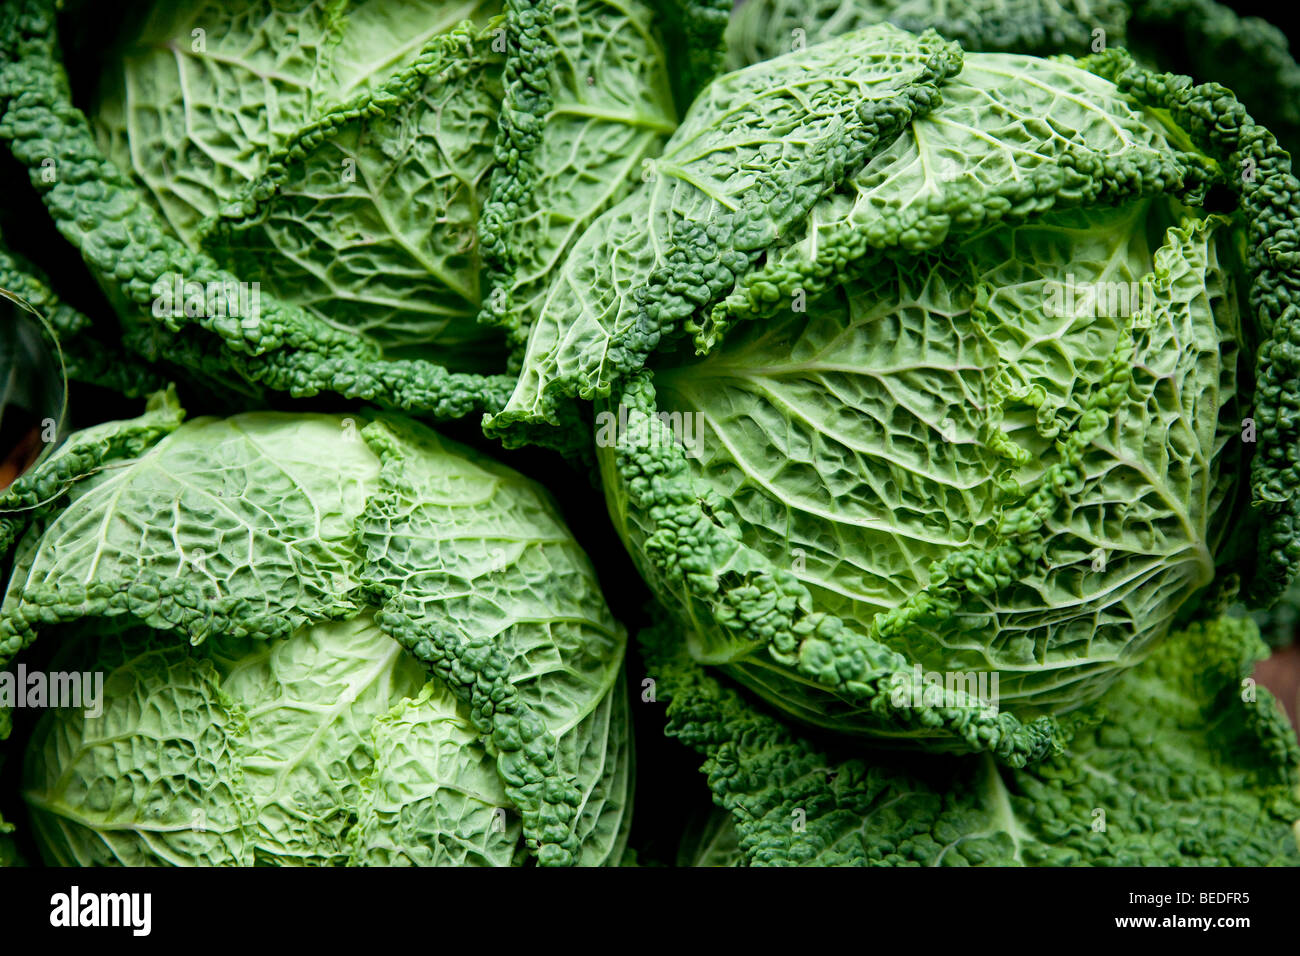 Savoy or Curly Cabbage Stock Photo